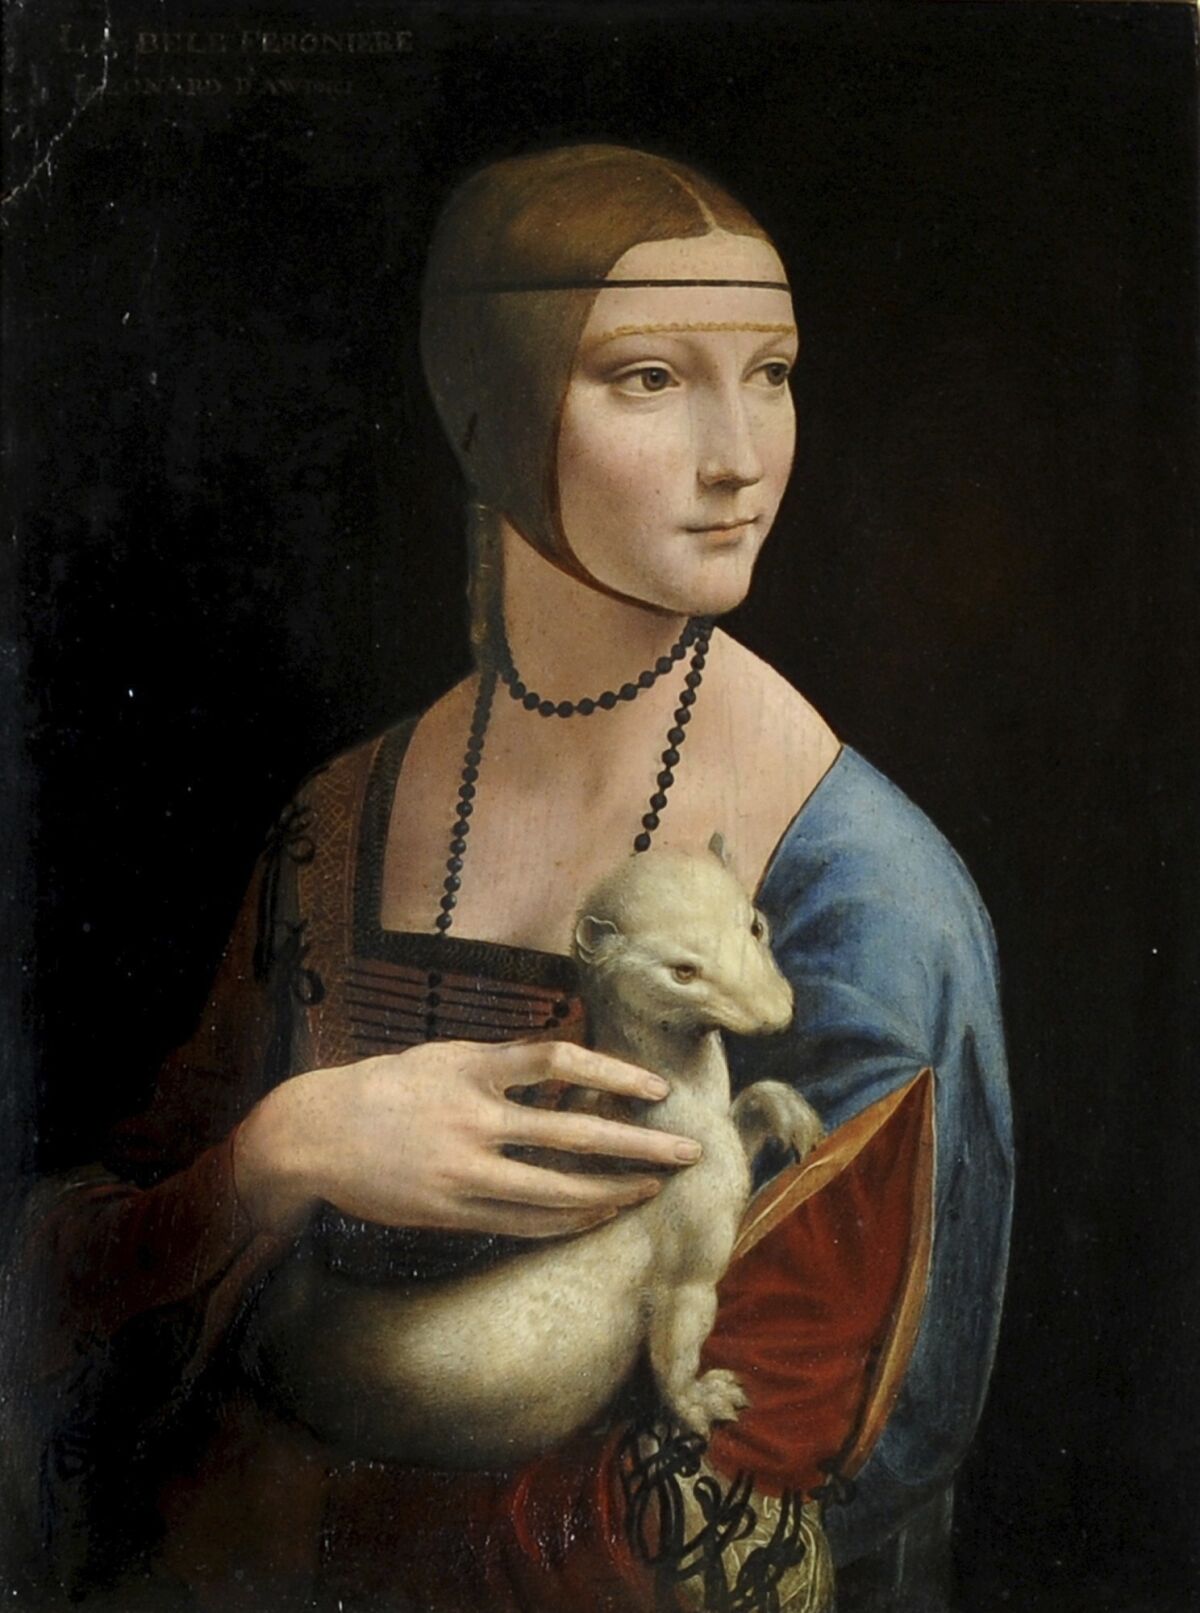 A scientist has revealed a new discovery about the Leonardo da Vinci painting "Lady With an Ermine."